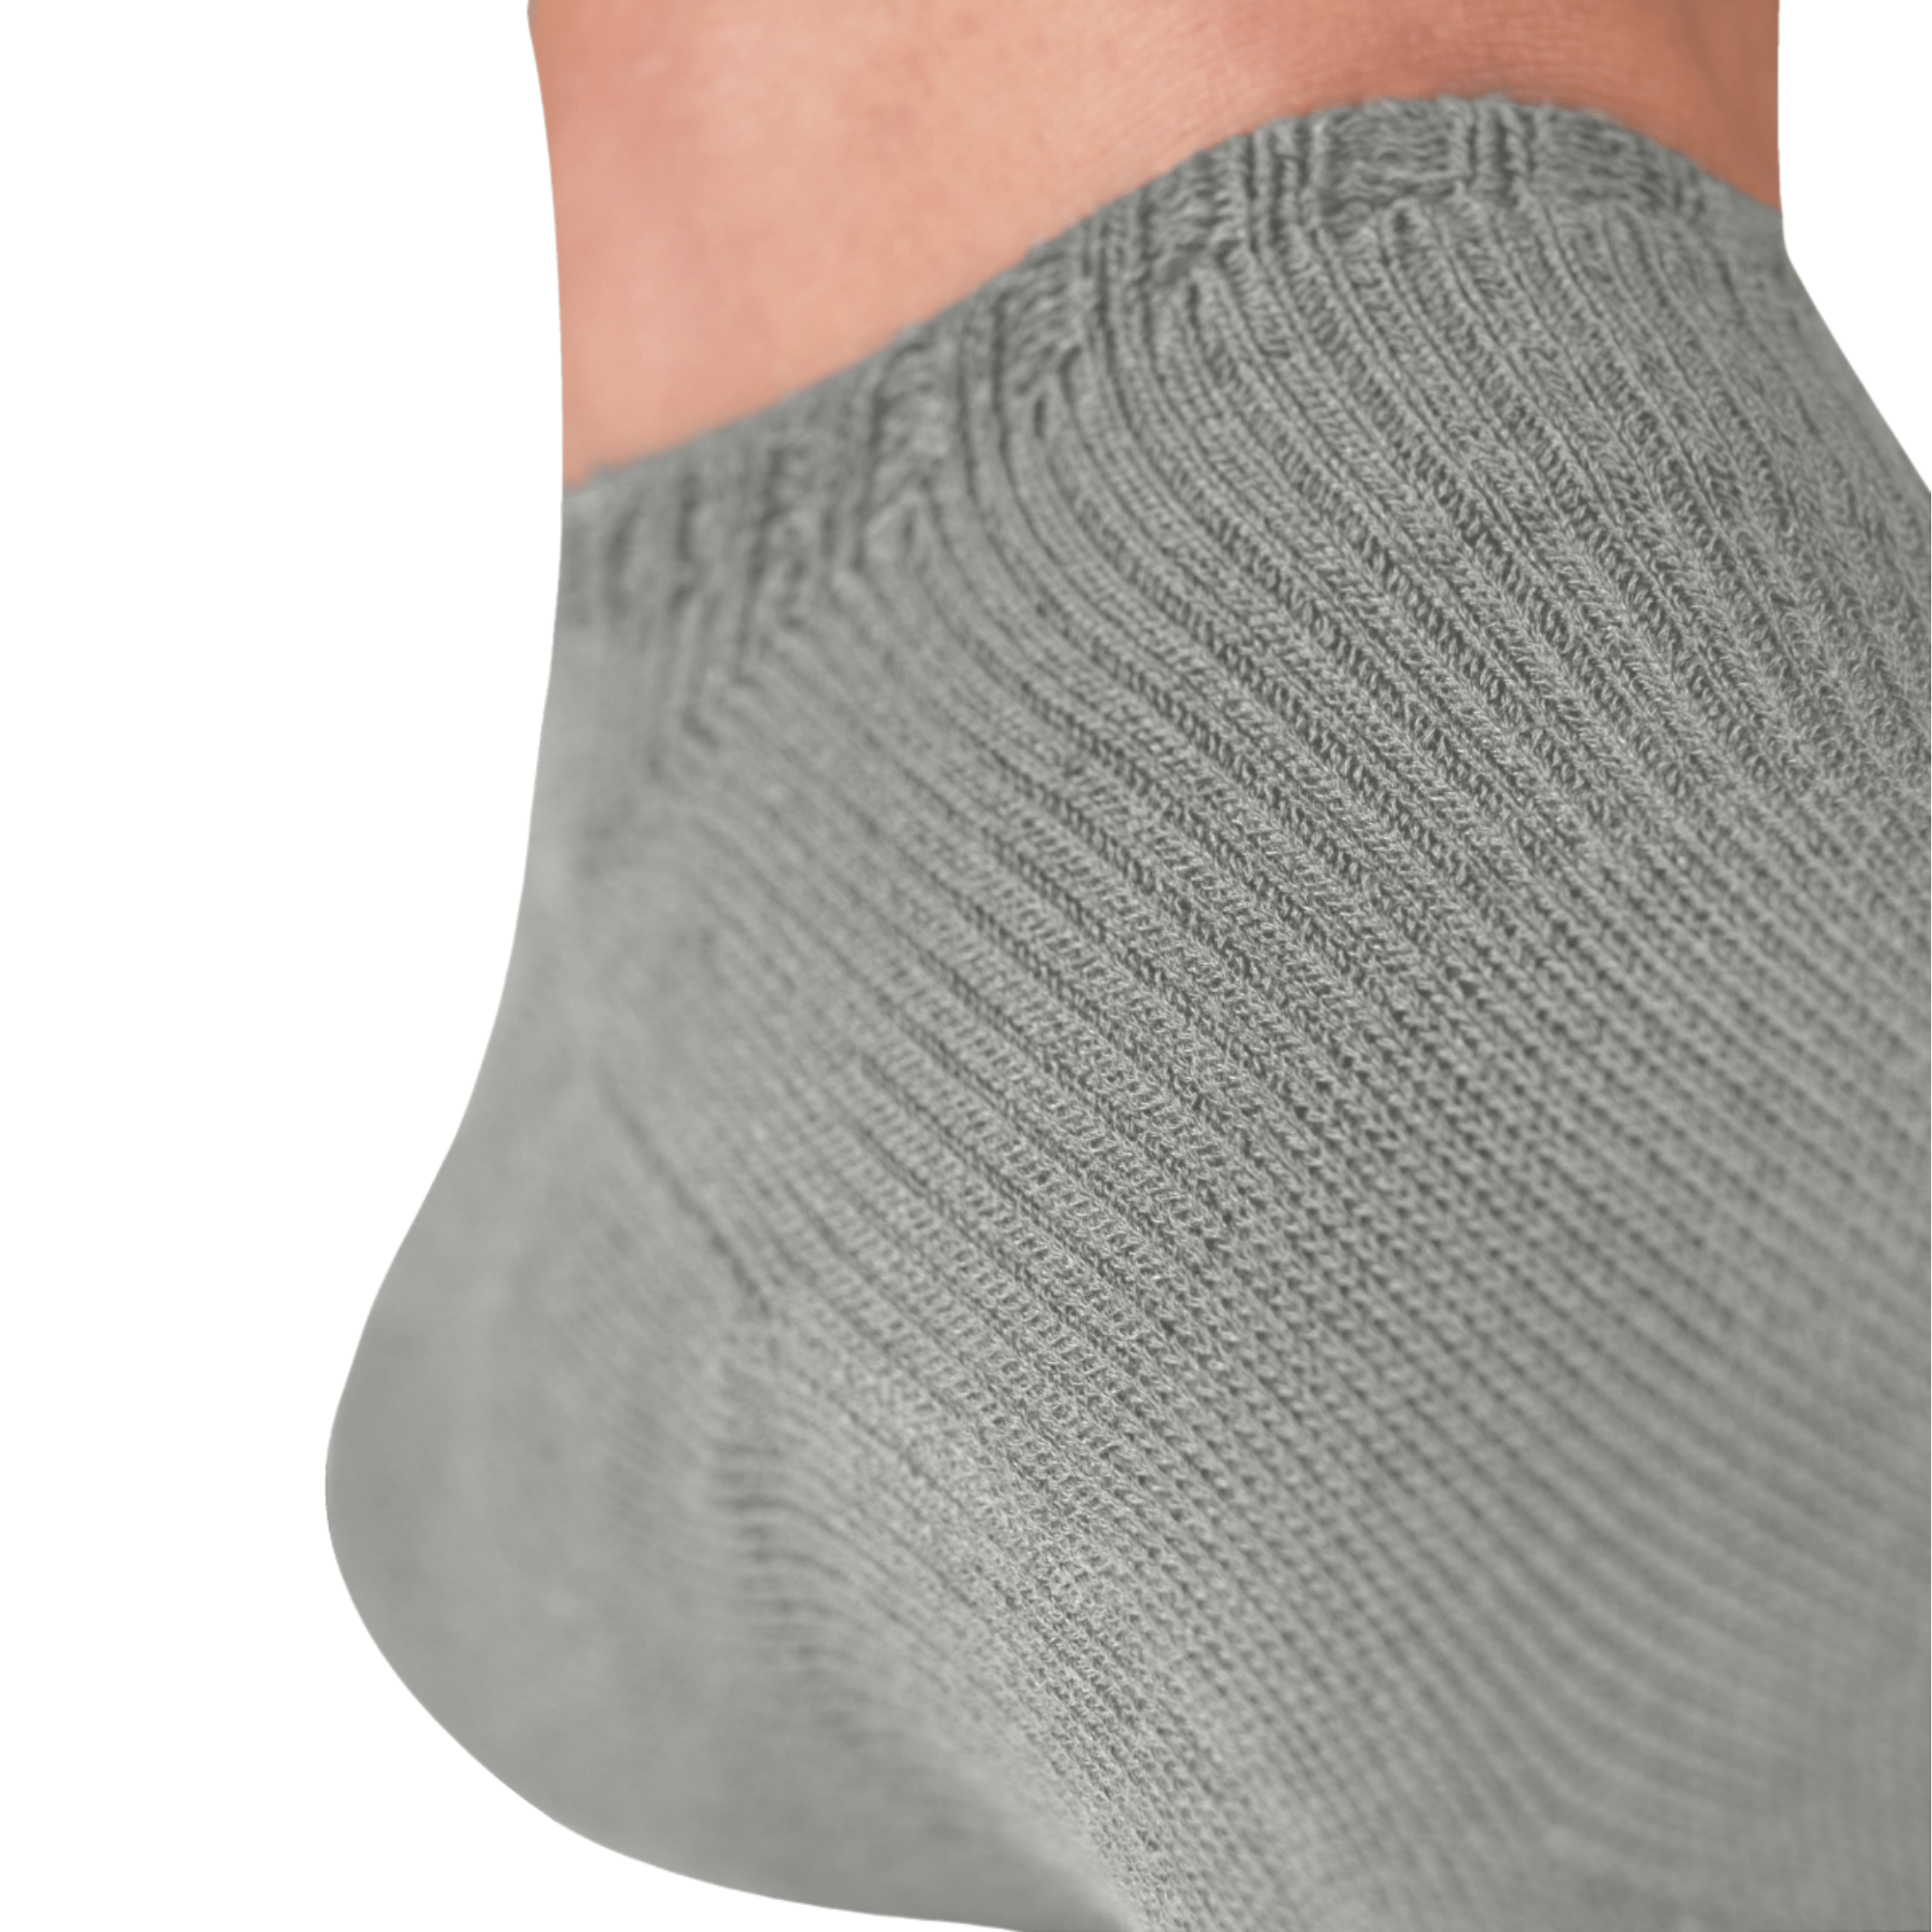 Track and Trail Running Mates Sneaker chaussettes à orteils gris sport